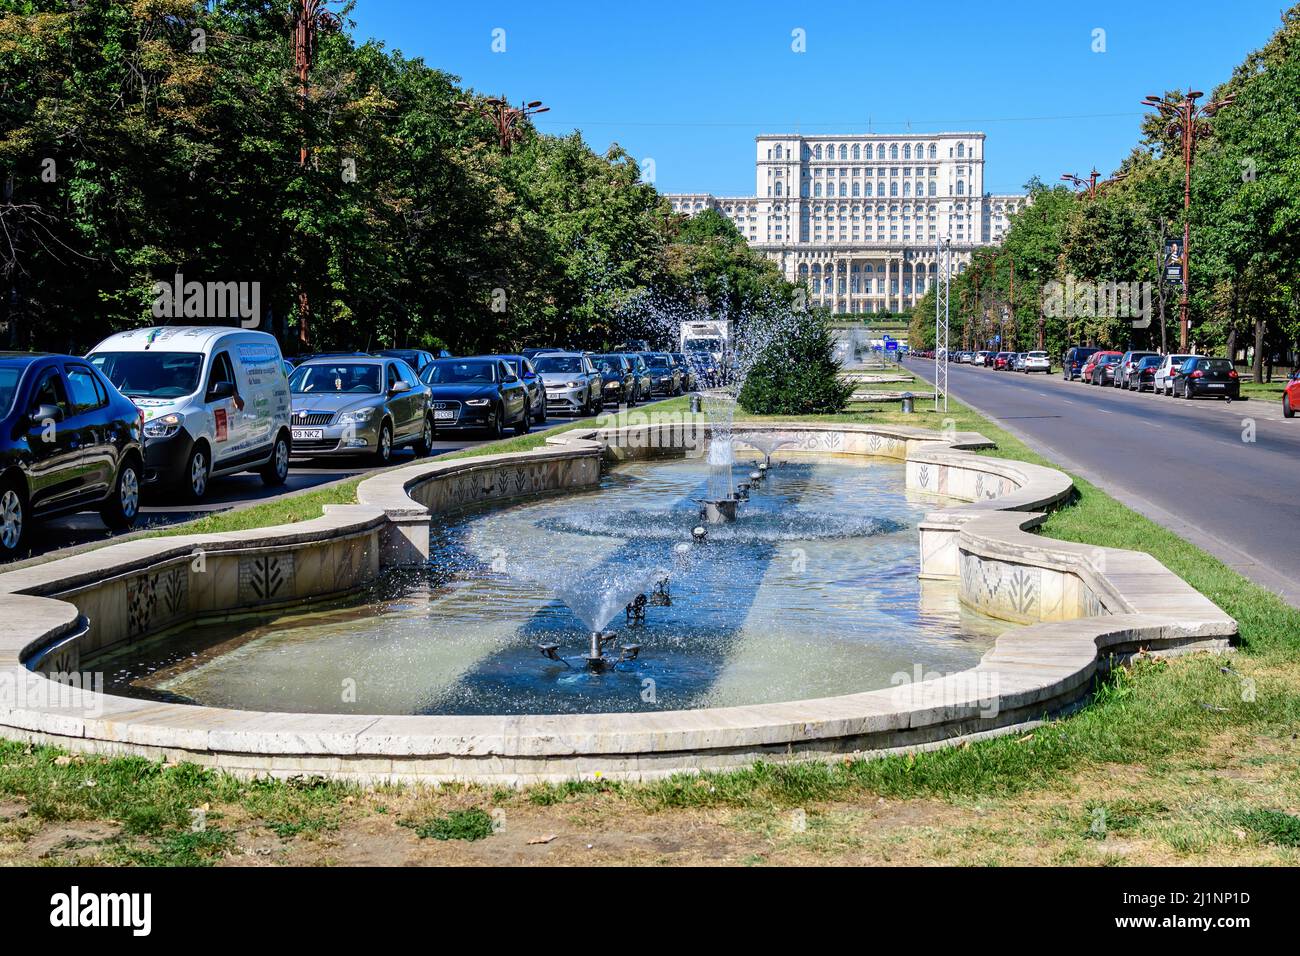 Bucharest, Romania, 4 September 2021: Decorative fontain on the street near Palace of the Parliament or People's House (Casa Poporului) in Constitutie Stock Photo